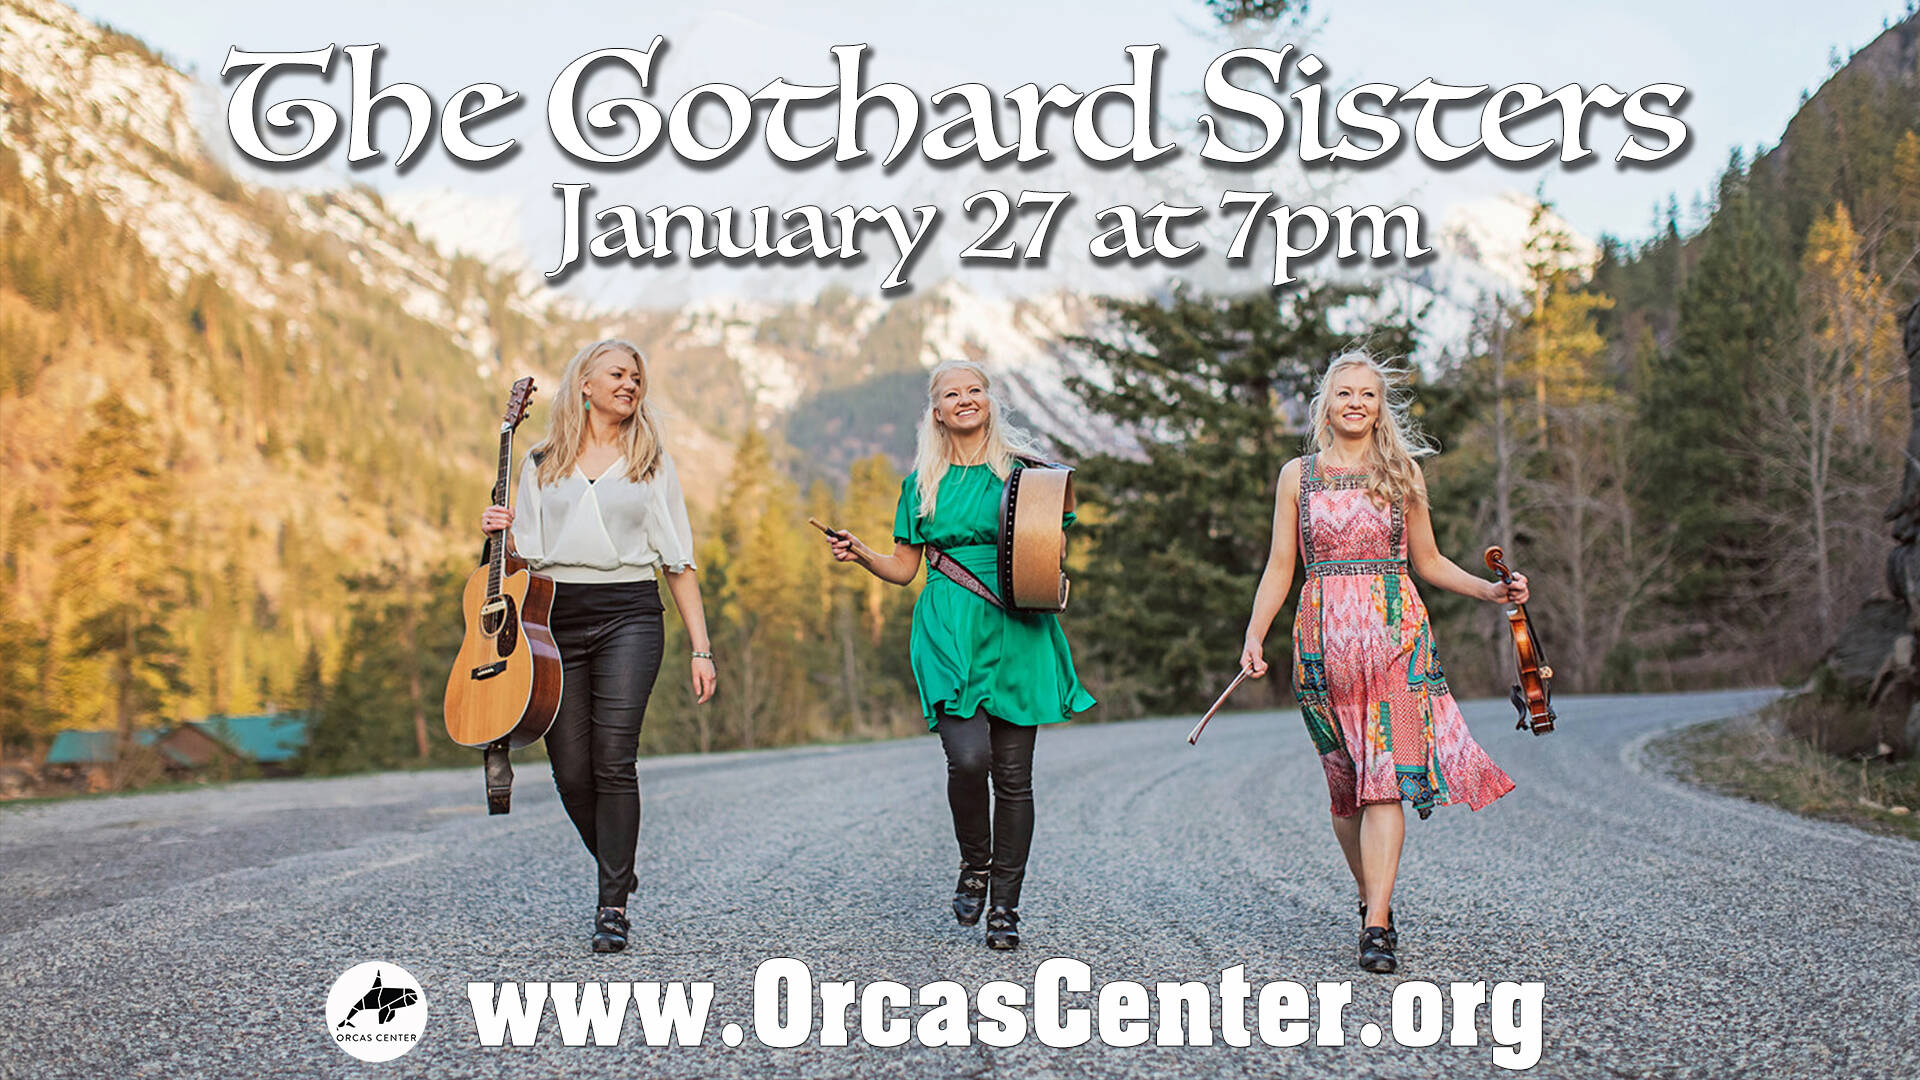 Contributed photo by the Orcas Center
The Gothard Sisters play at Orcas Center on Friday, Jan. 27 at 7 p.m.